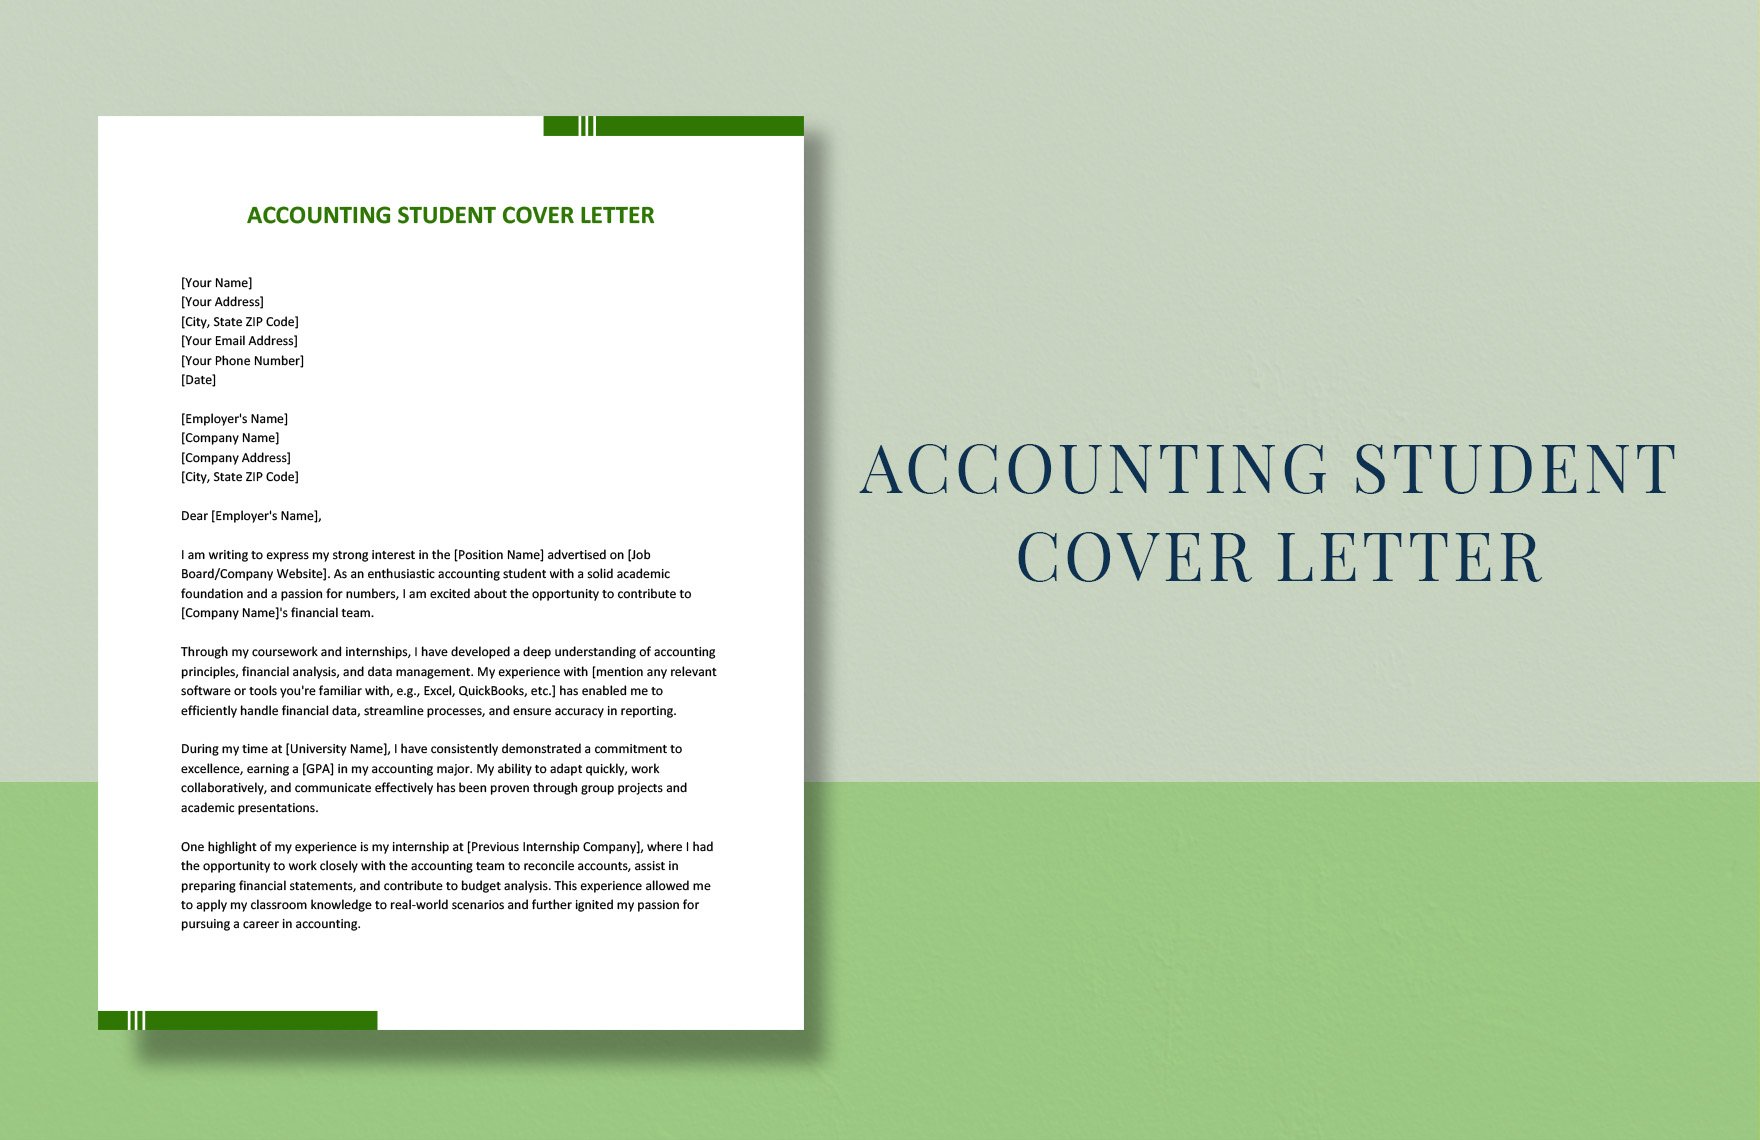 Accounting Student Cover Letter in Word, Google Docs